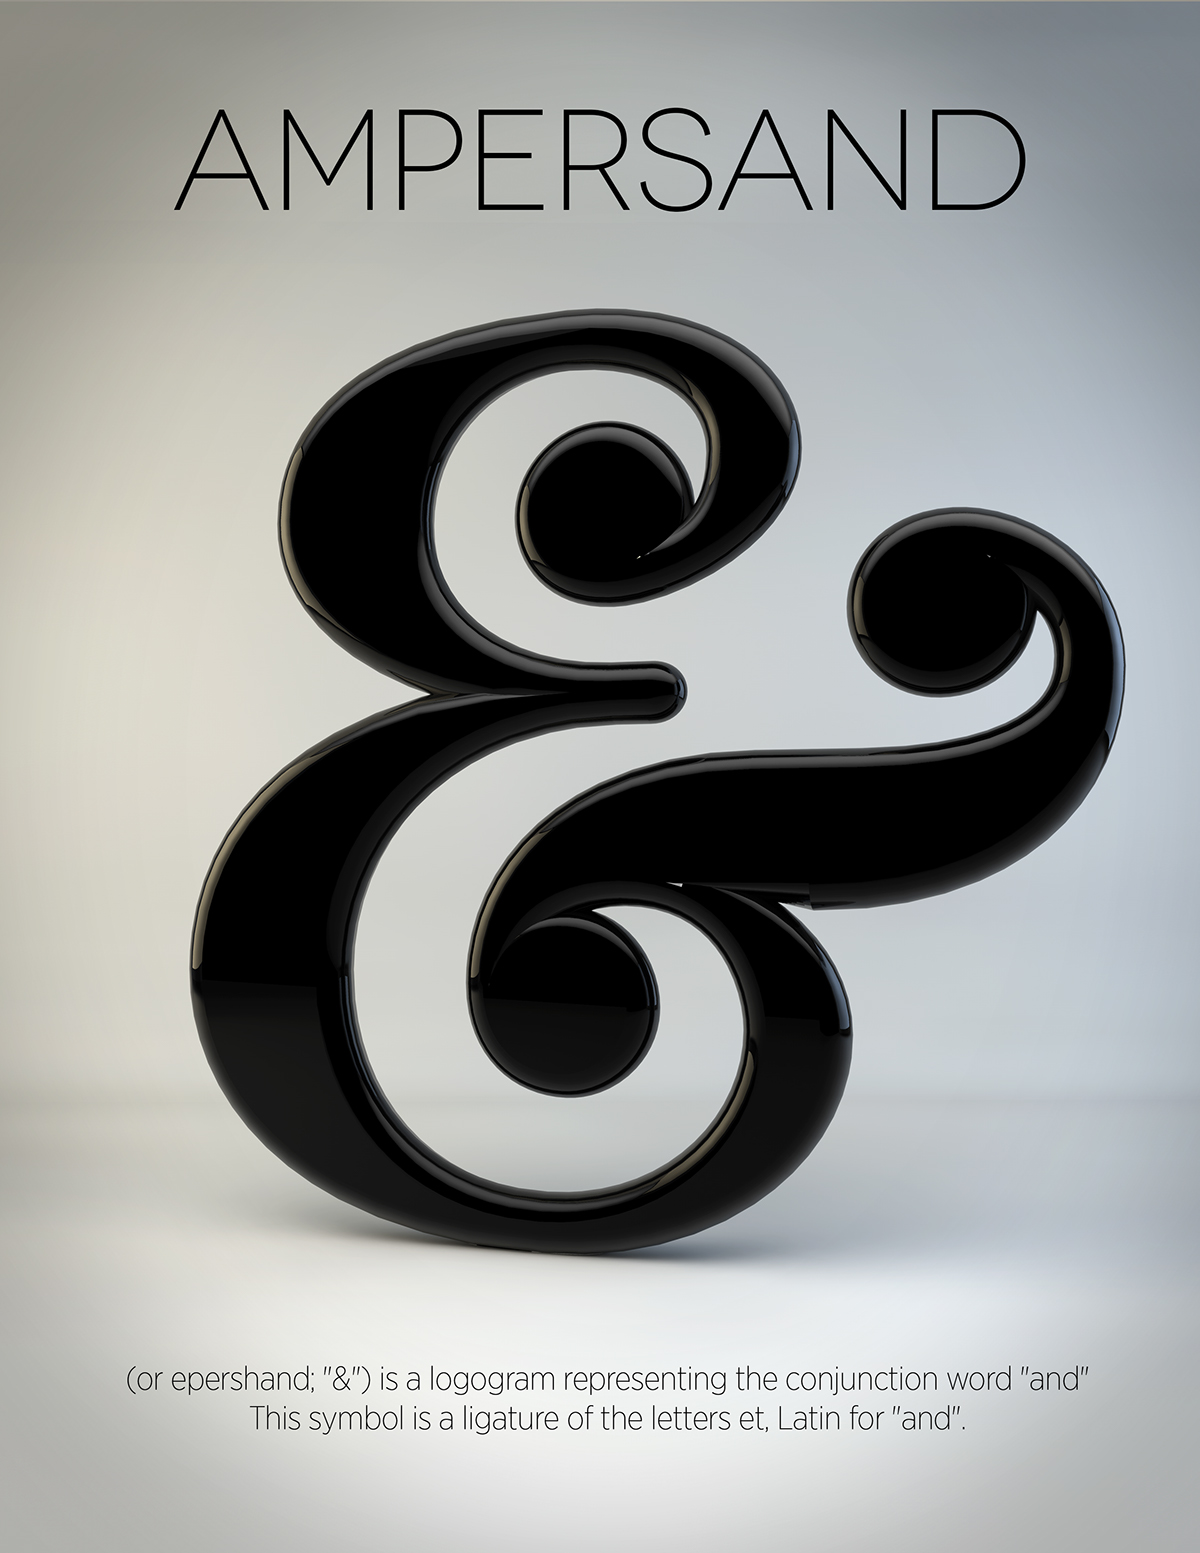 etymology general type symbols 3D Render personal history symbolism ampersand at sign asterisk experimental type